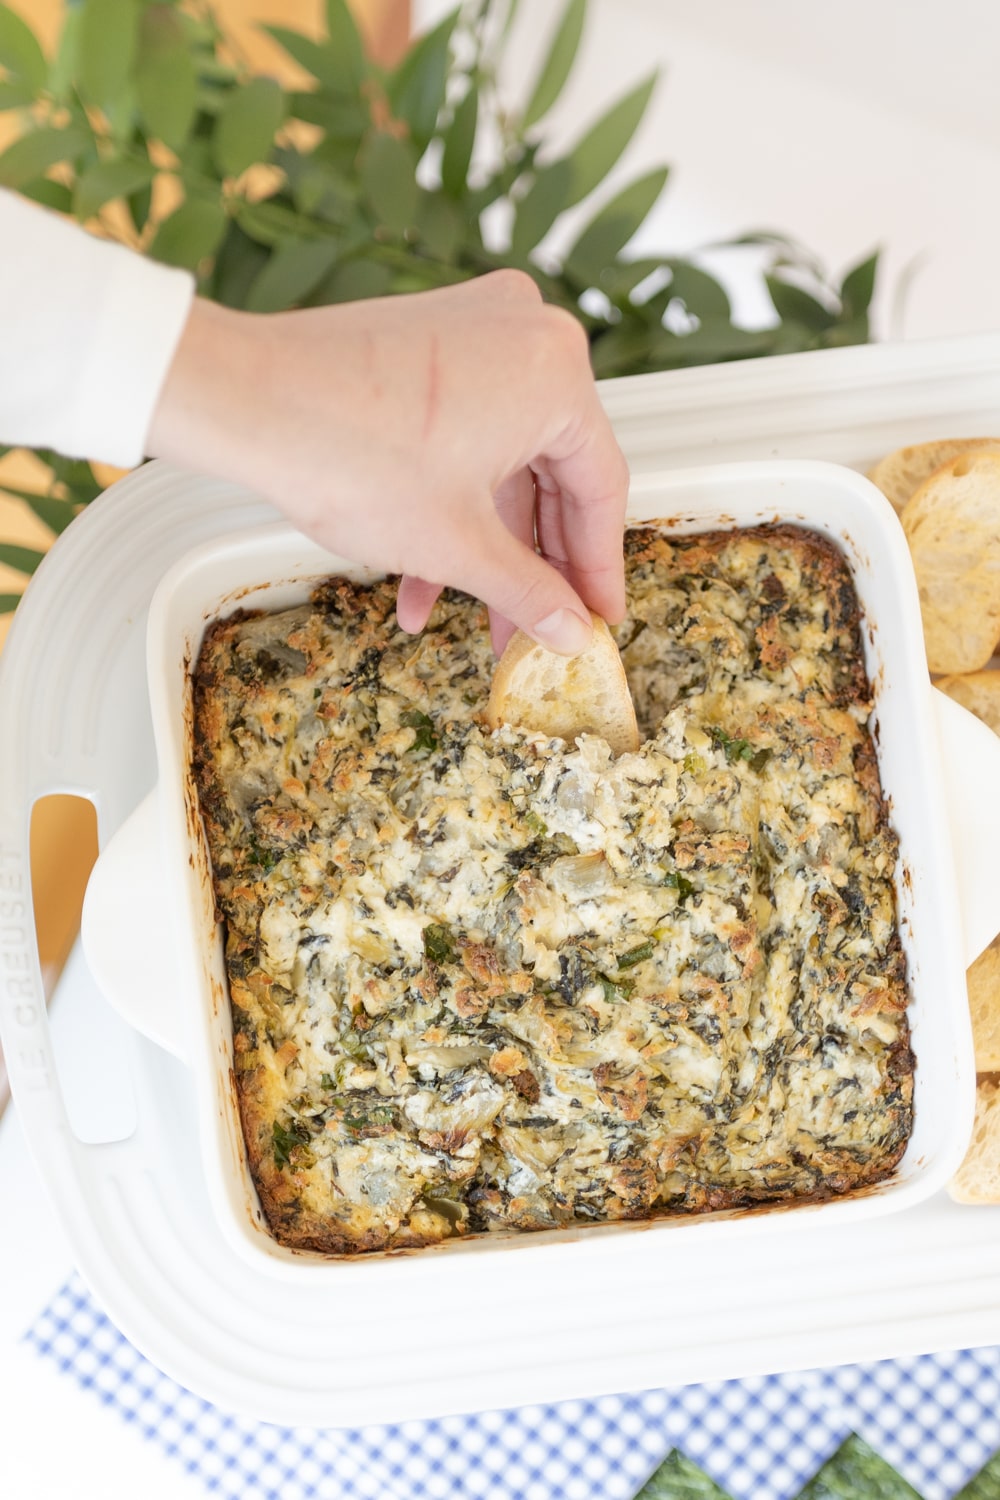 baked spinach cheese dip recipe created by blogger Stephanie Ziajka on Diary of a Debutante